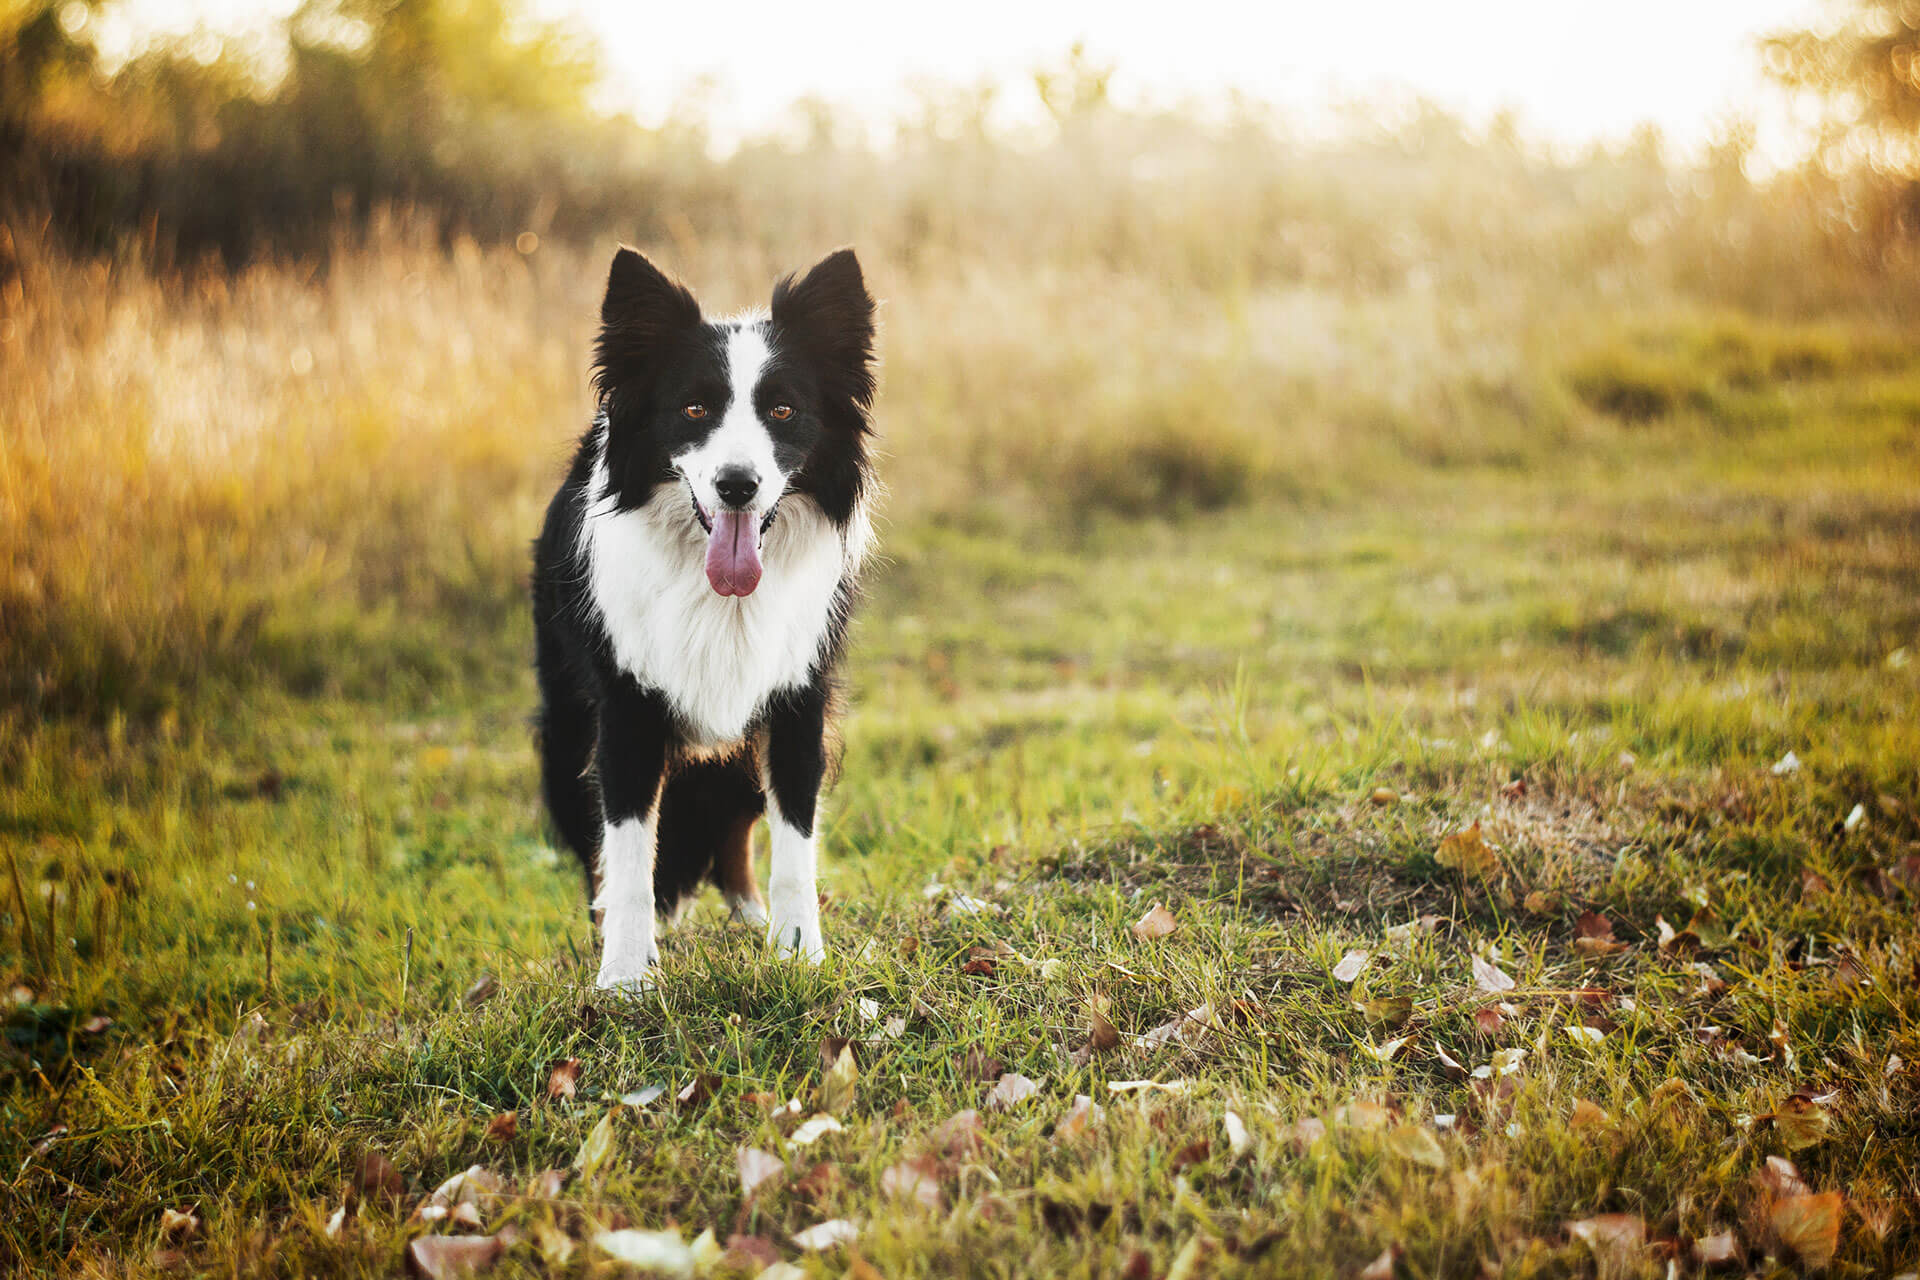 white and black dog standing on grassy field